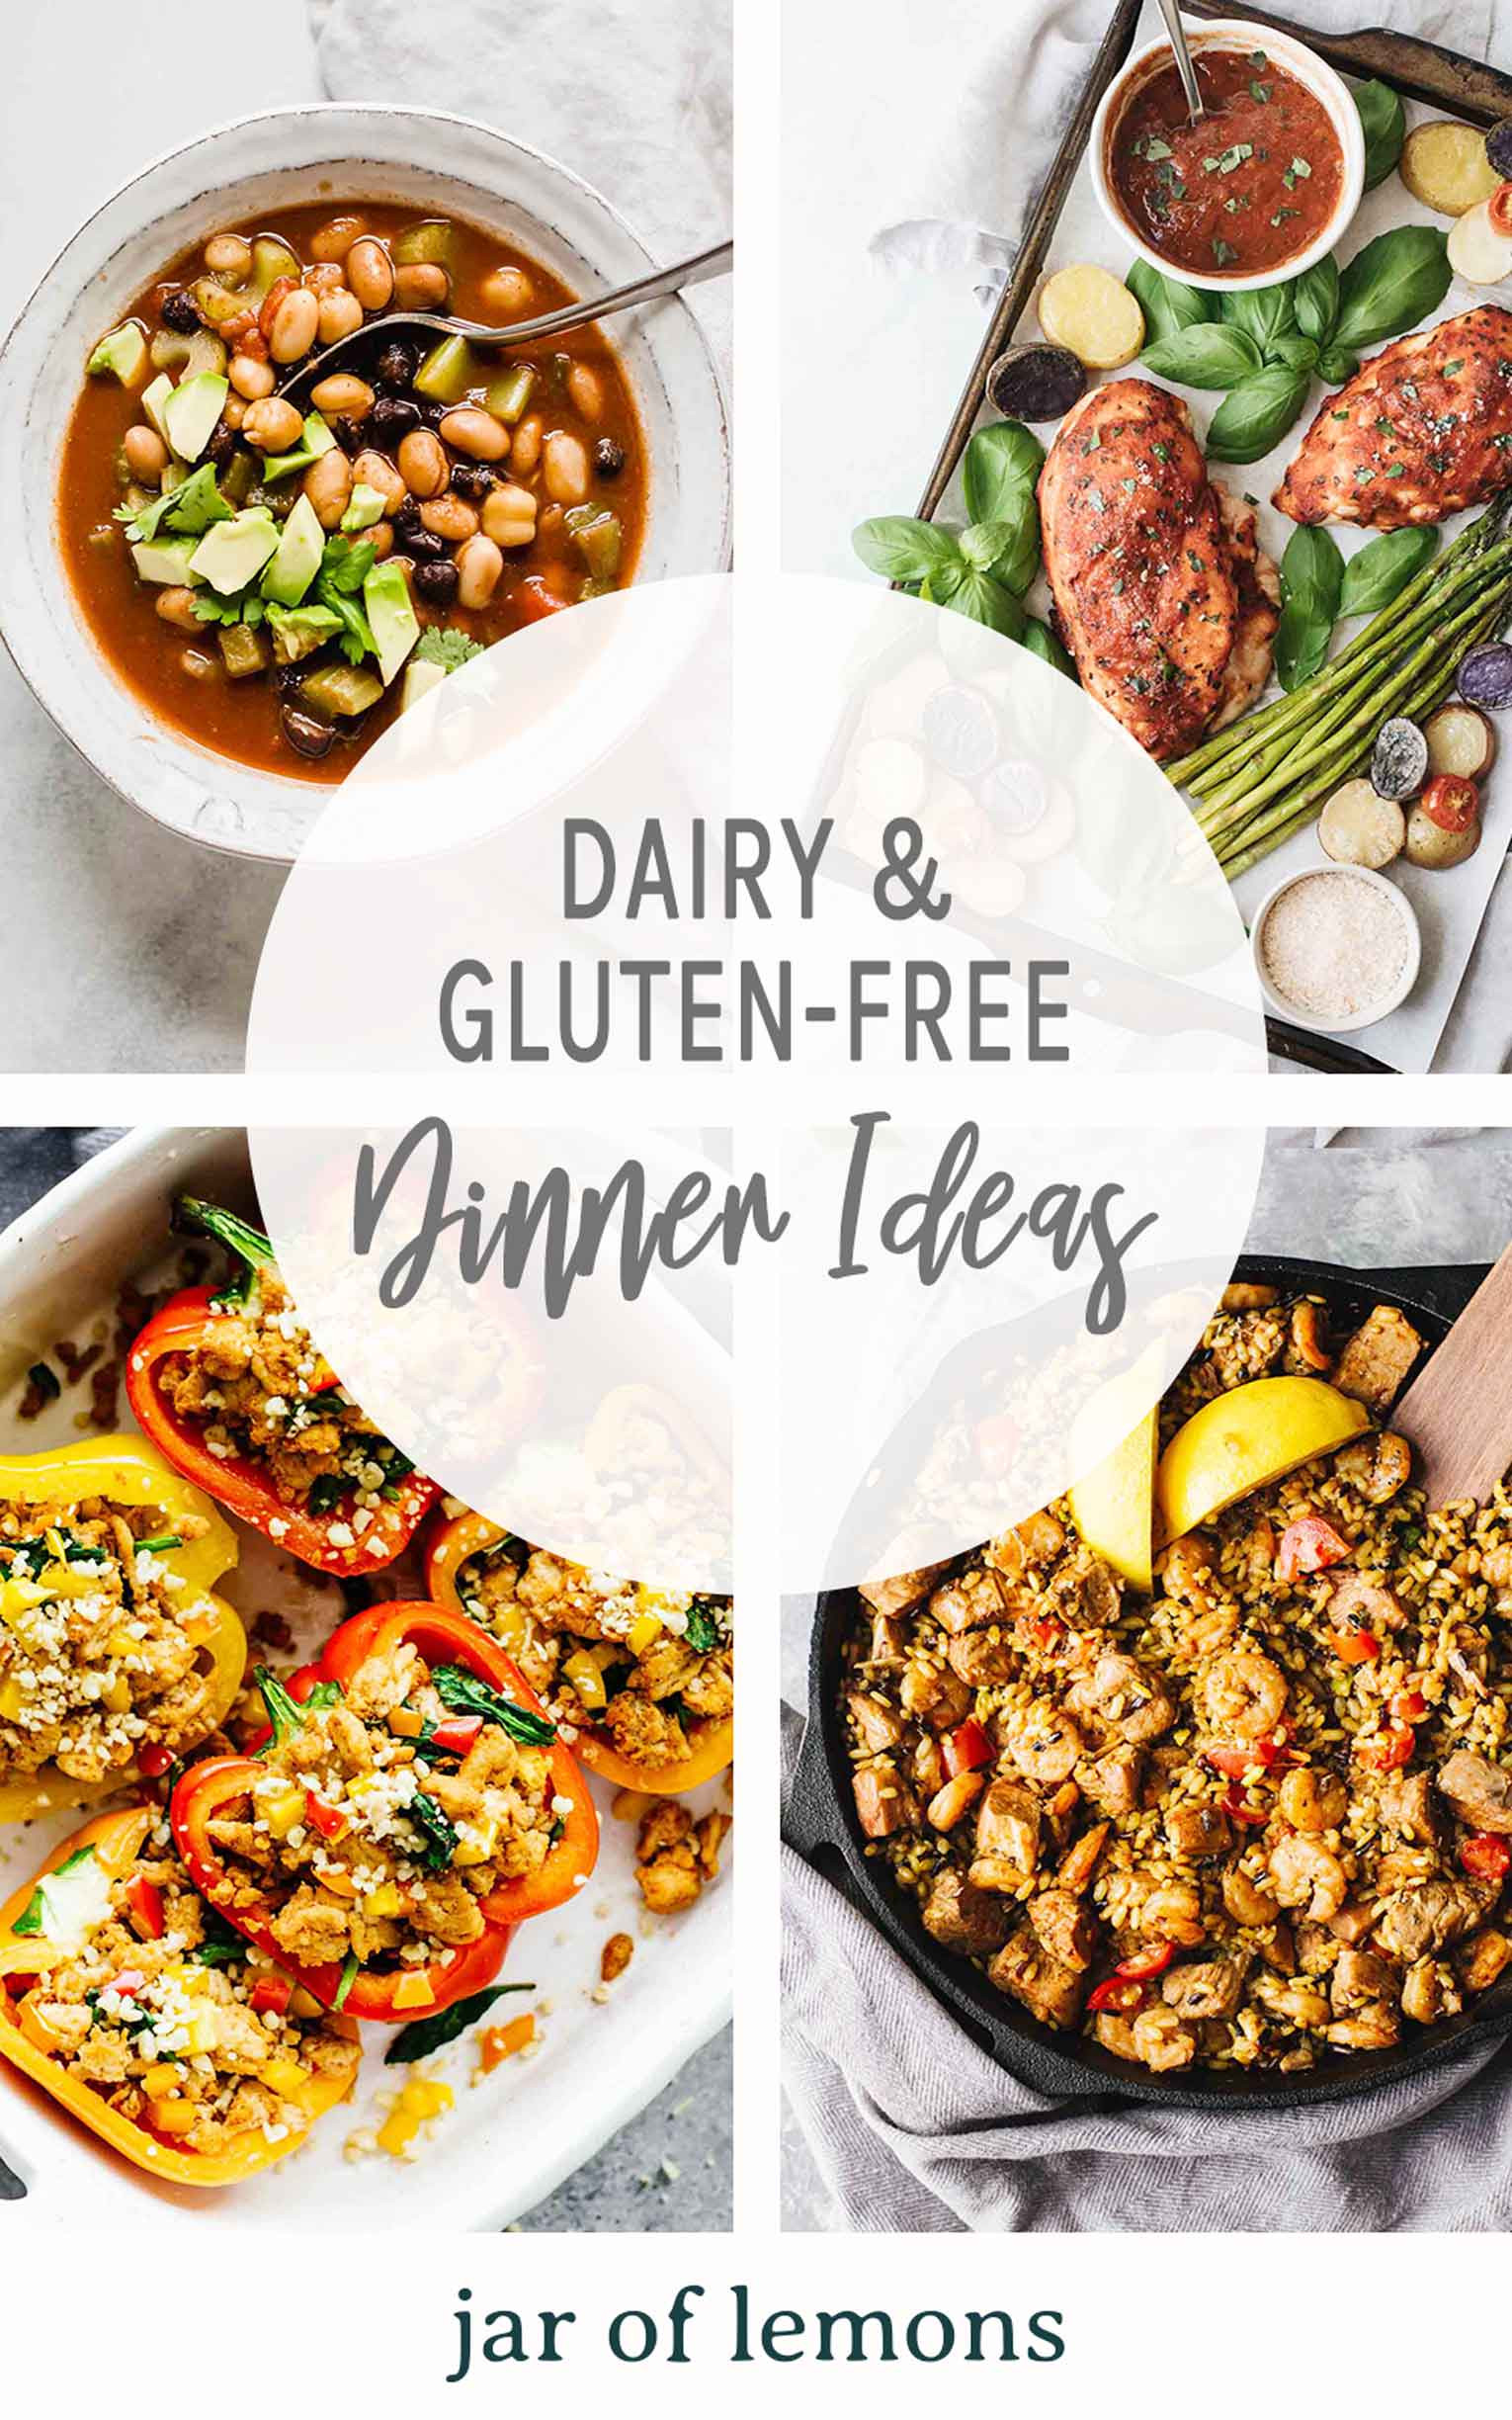 Gluten and Dairy Free Recipes for Dinner Luxury Easy Dairy &amp; Gluten Free Dinner Recipes Jar Lemons